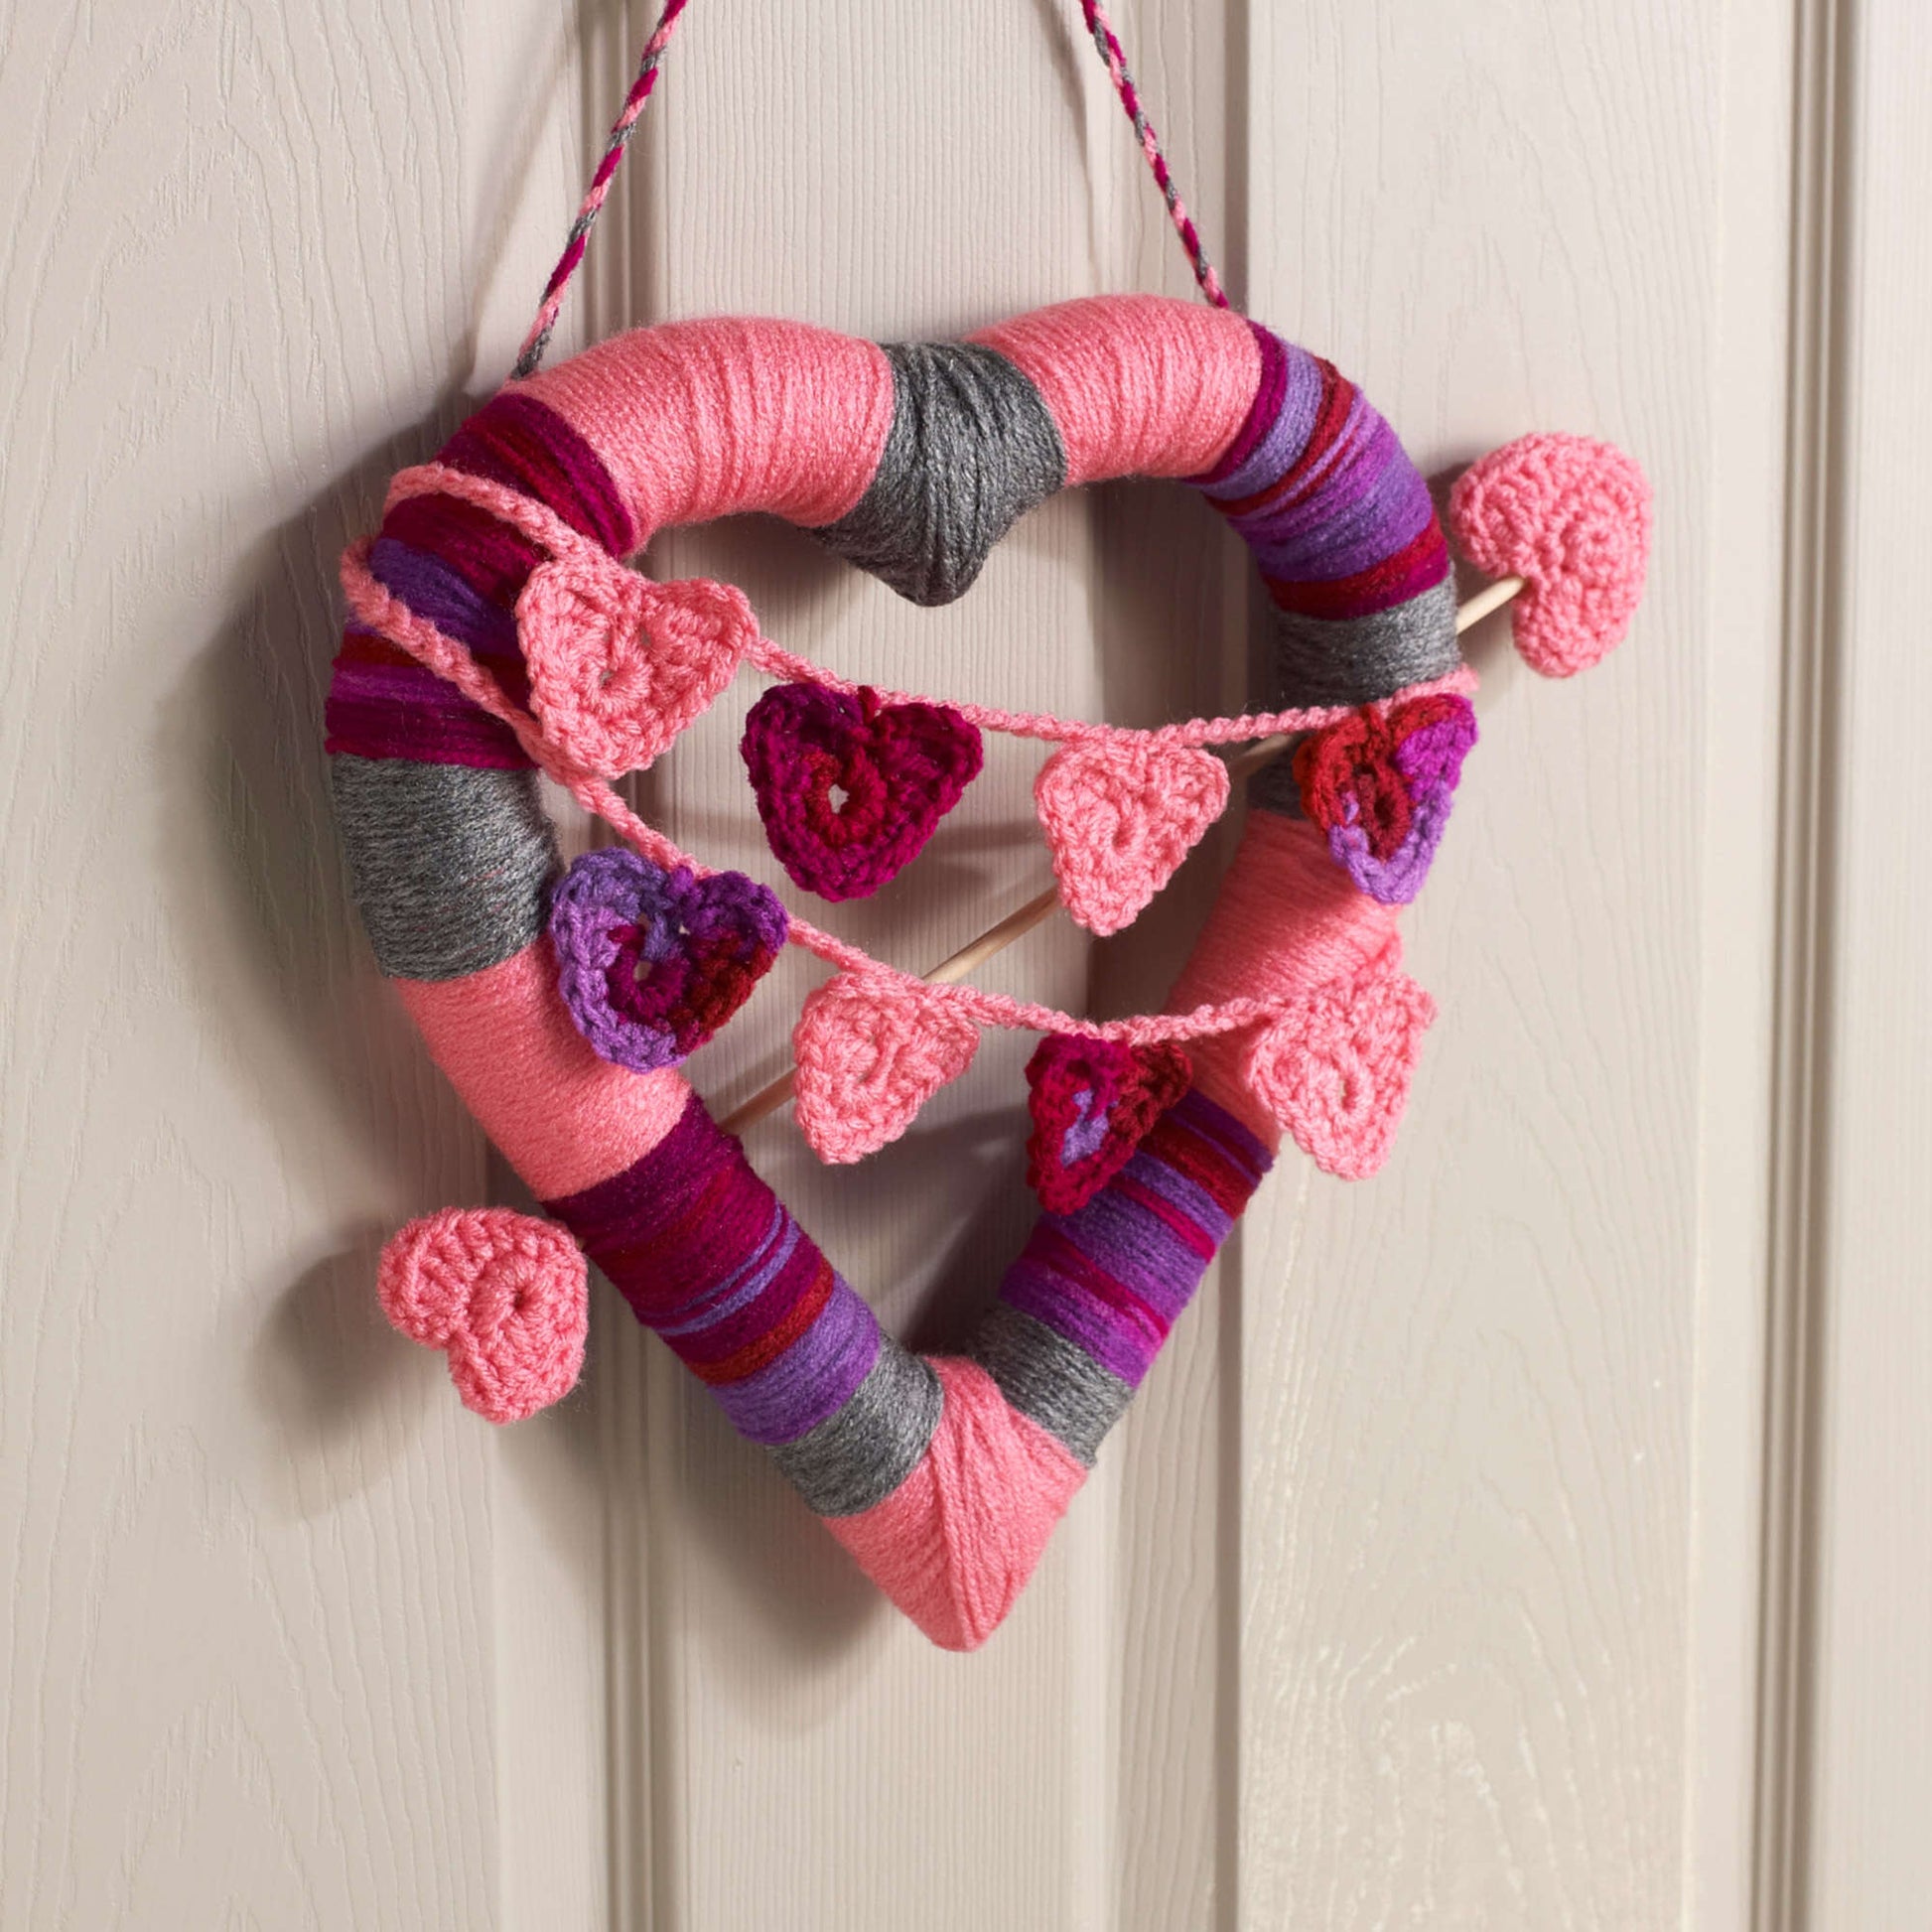 Heart Rope Wreath for Valentine's Day - Life as a LEO Wife